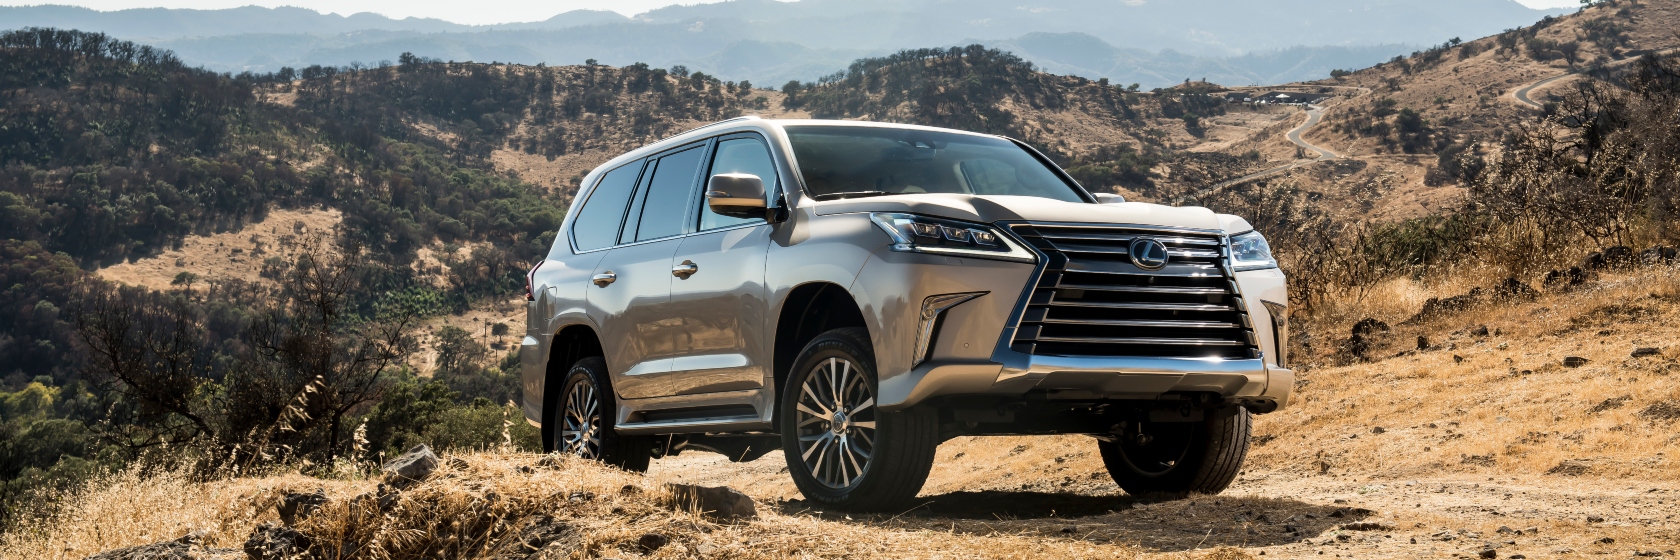 comprehensive-review-of-the-pre-owned-lexus-lx-570